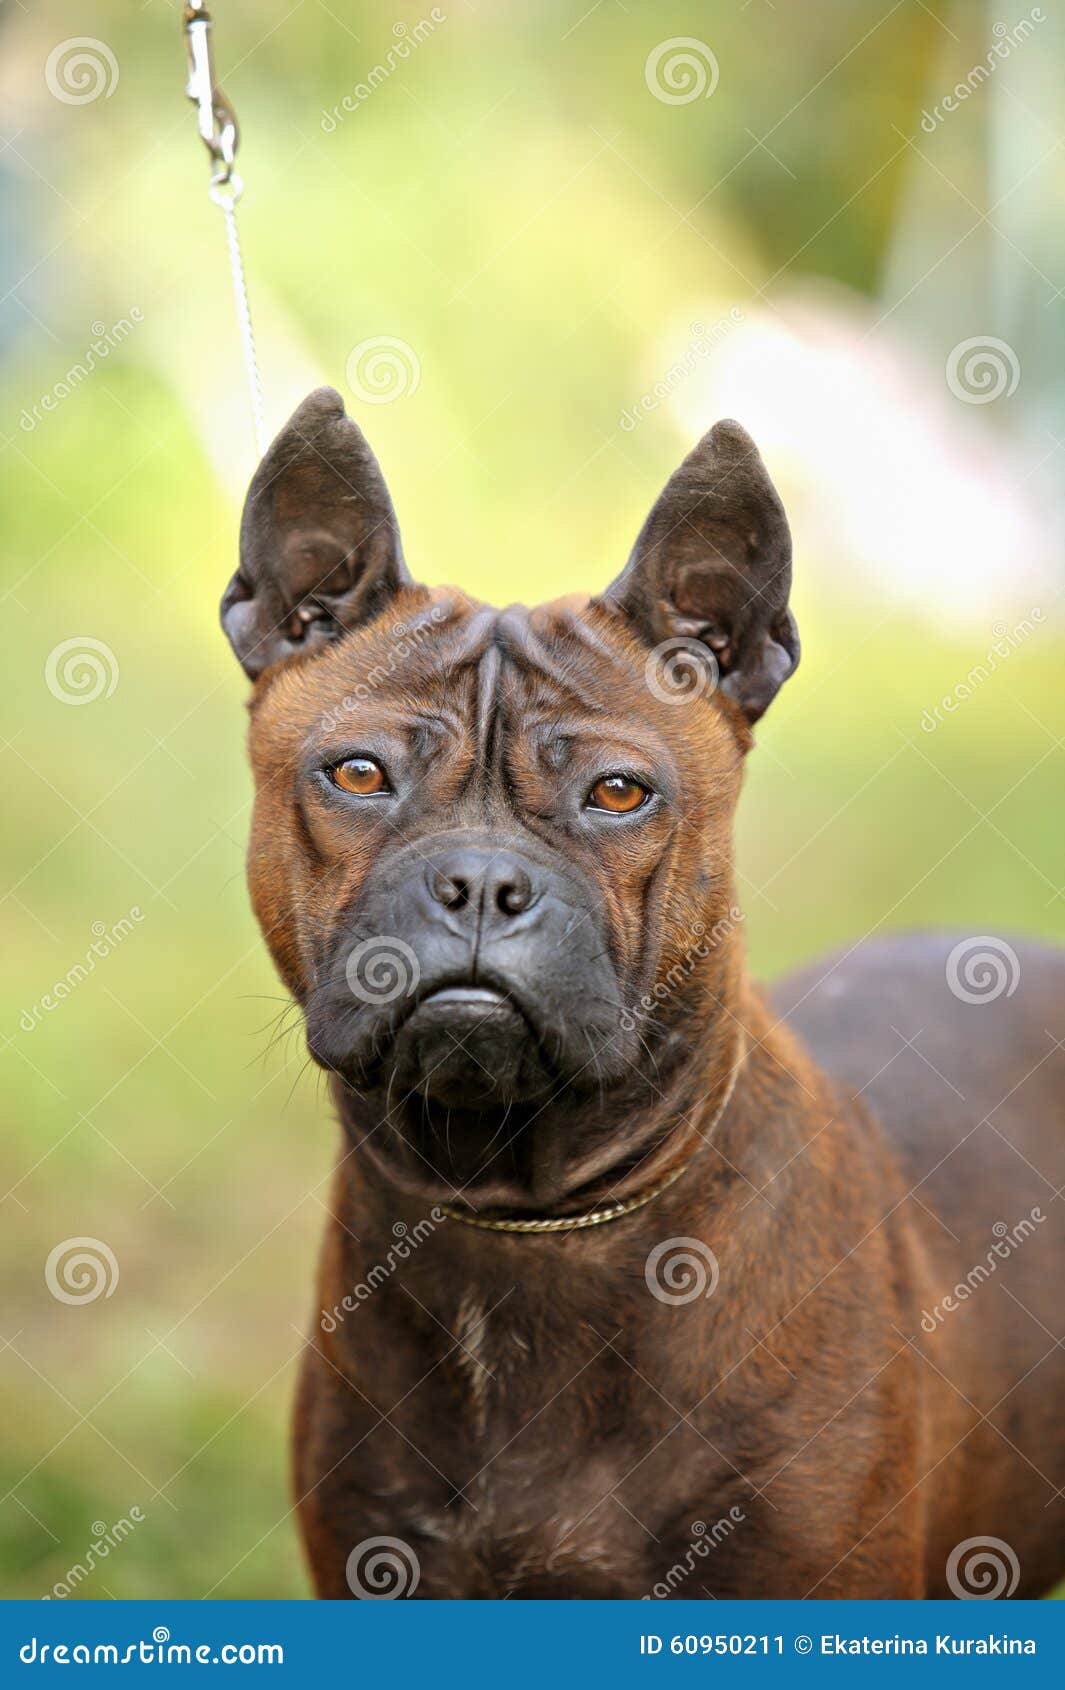 47 Chinese Chongqing Dog Photos Free Royalty Free Stock Photos From Dreamstime